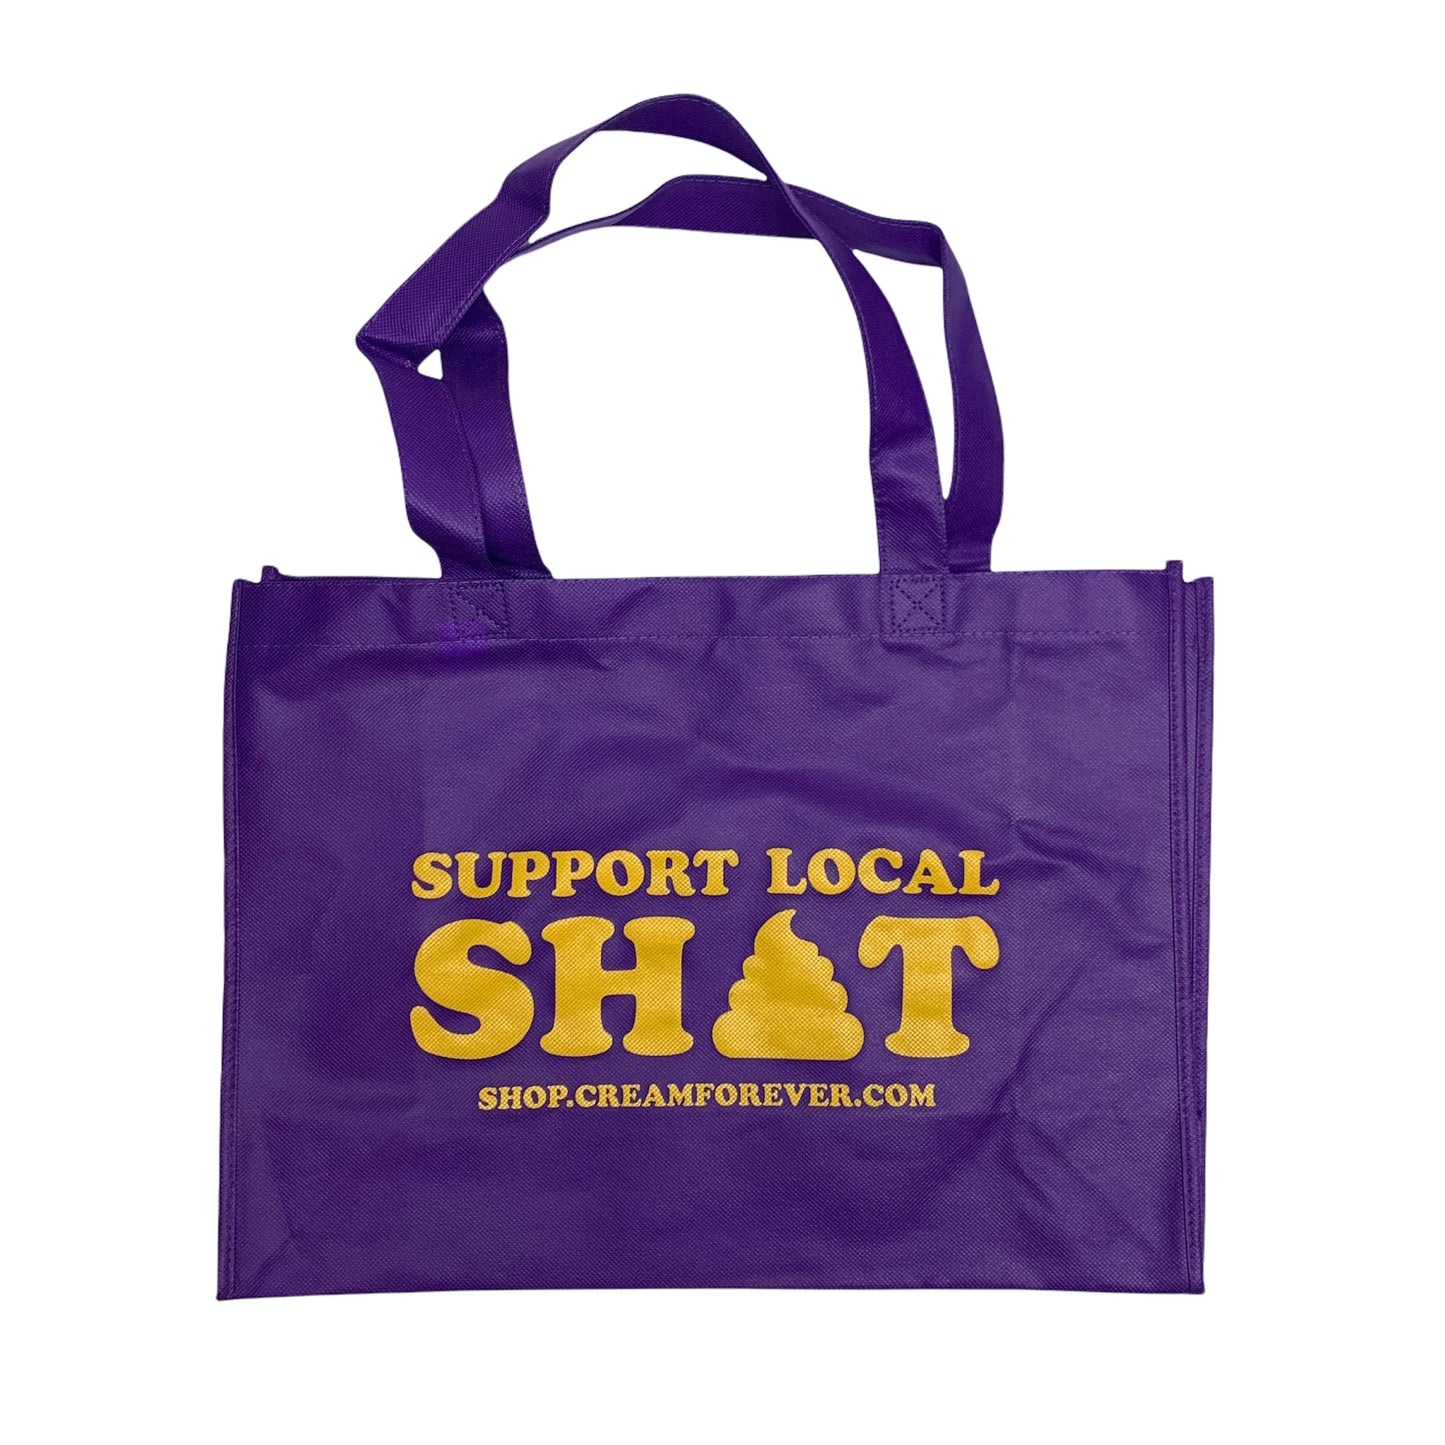 "Support Local Shit" - 12" x 16" Recycled Plastic Tote Bag